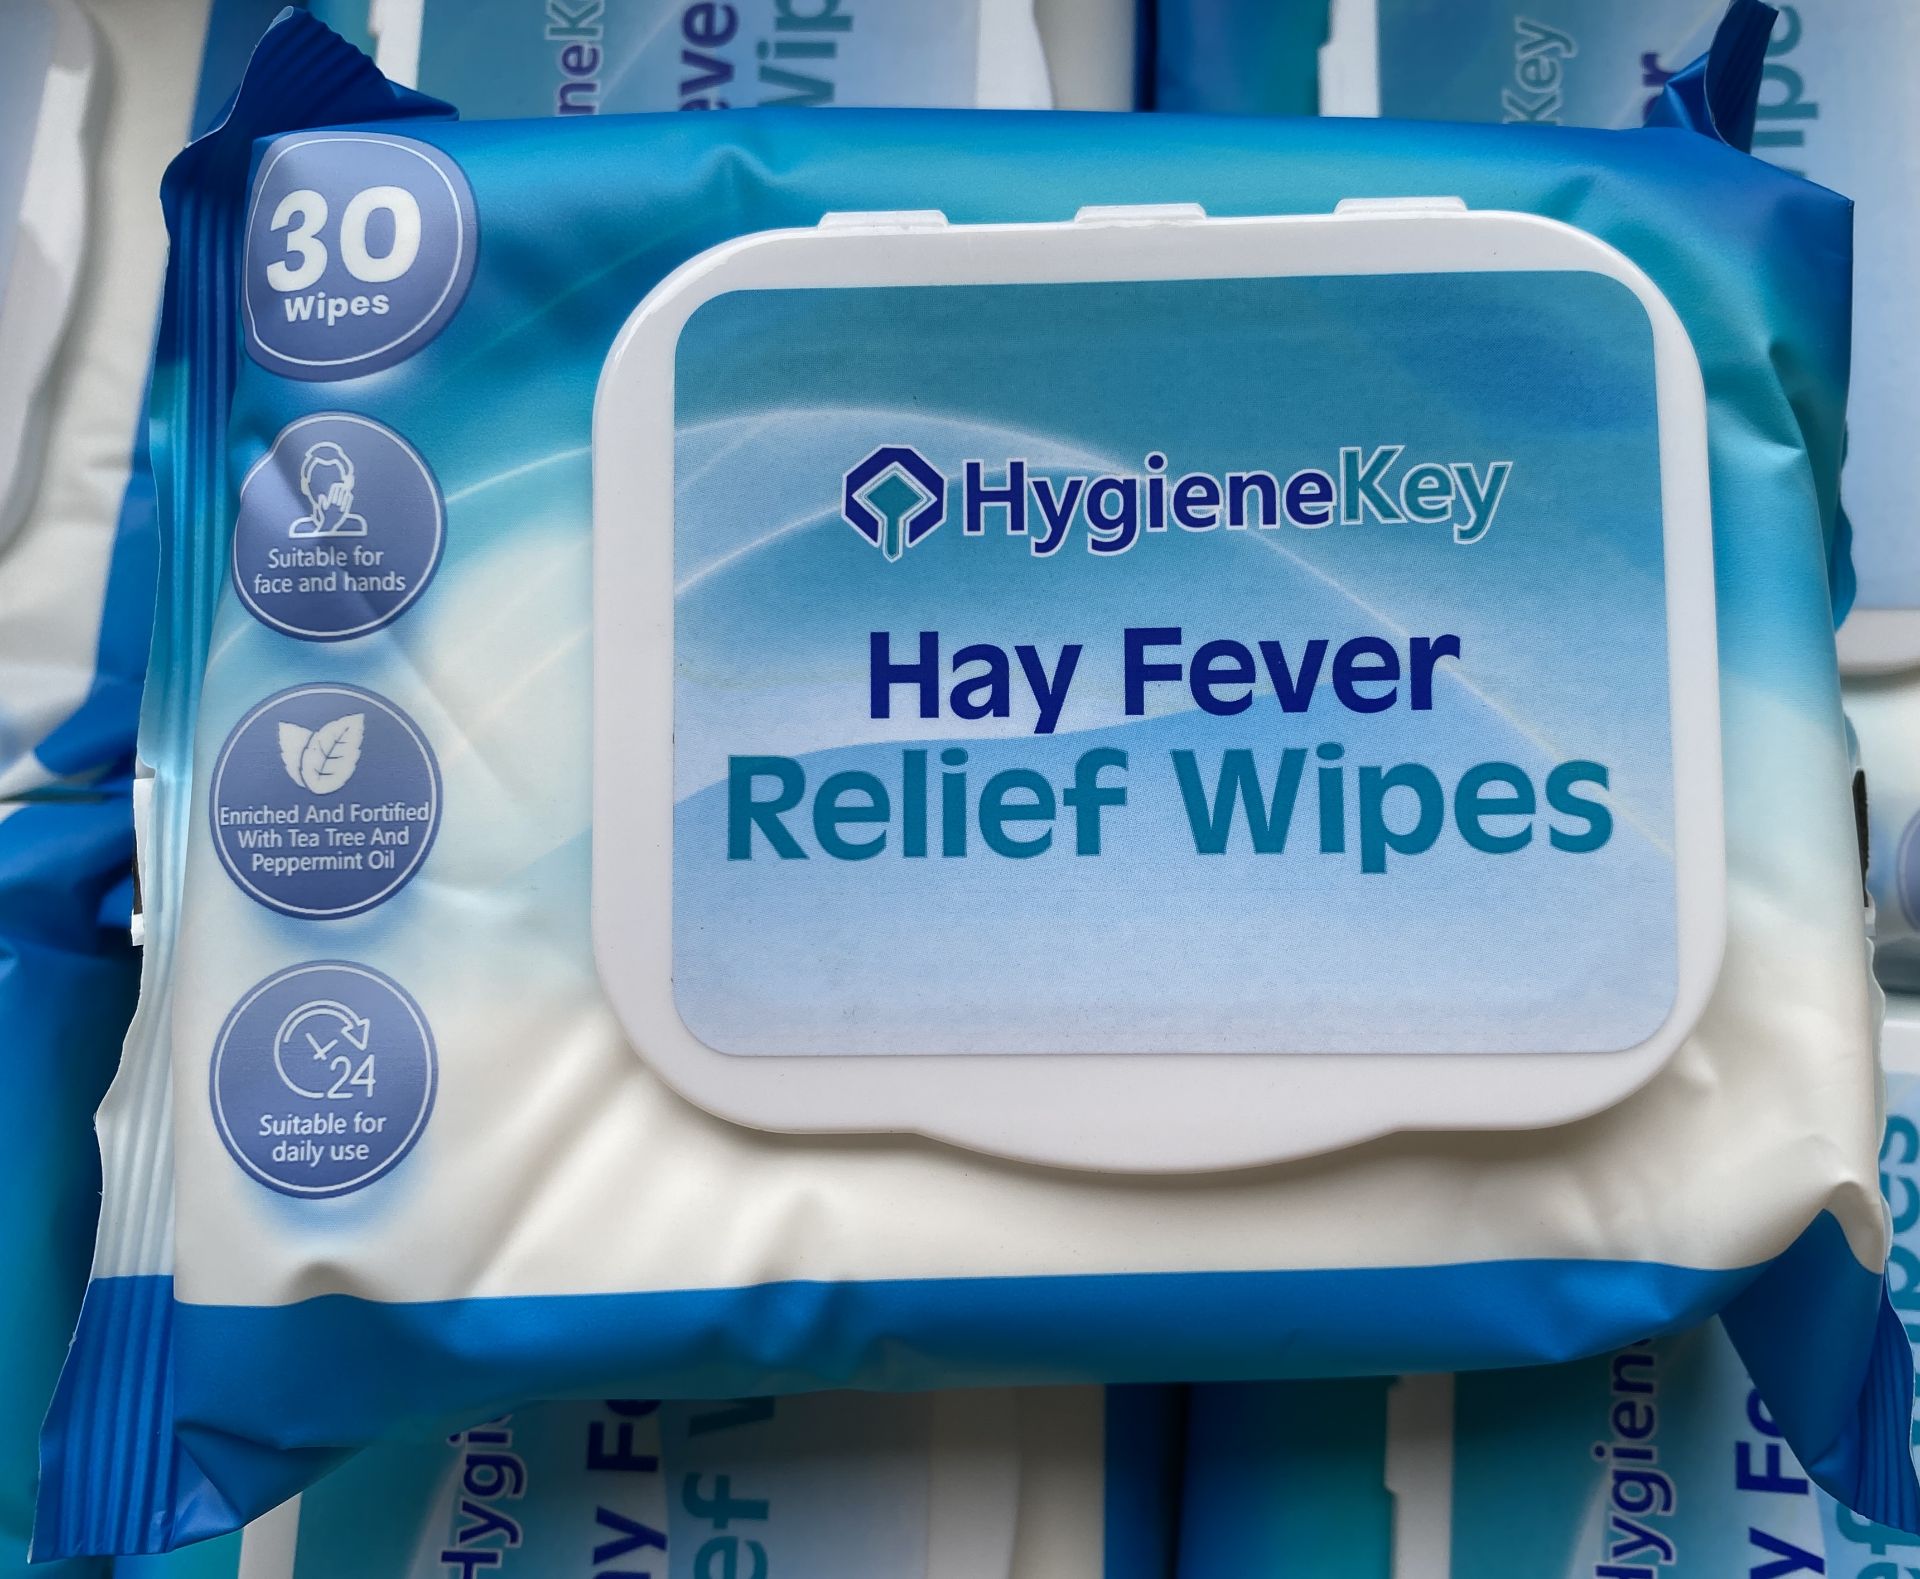 3600 x packs of Hygiene Key Hay Fever Relief Wipes (30 x wipes per pack - expiry date: 30/05/24) -